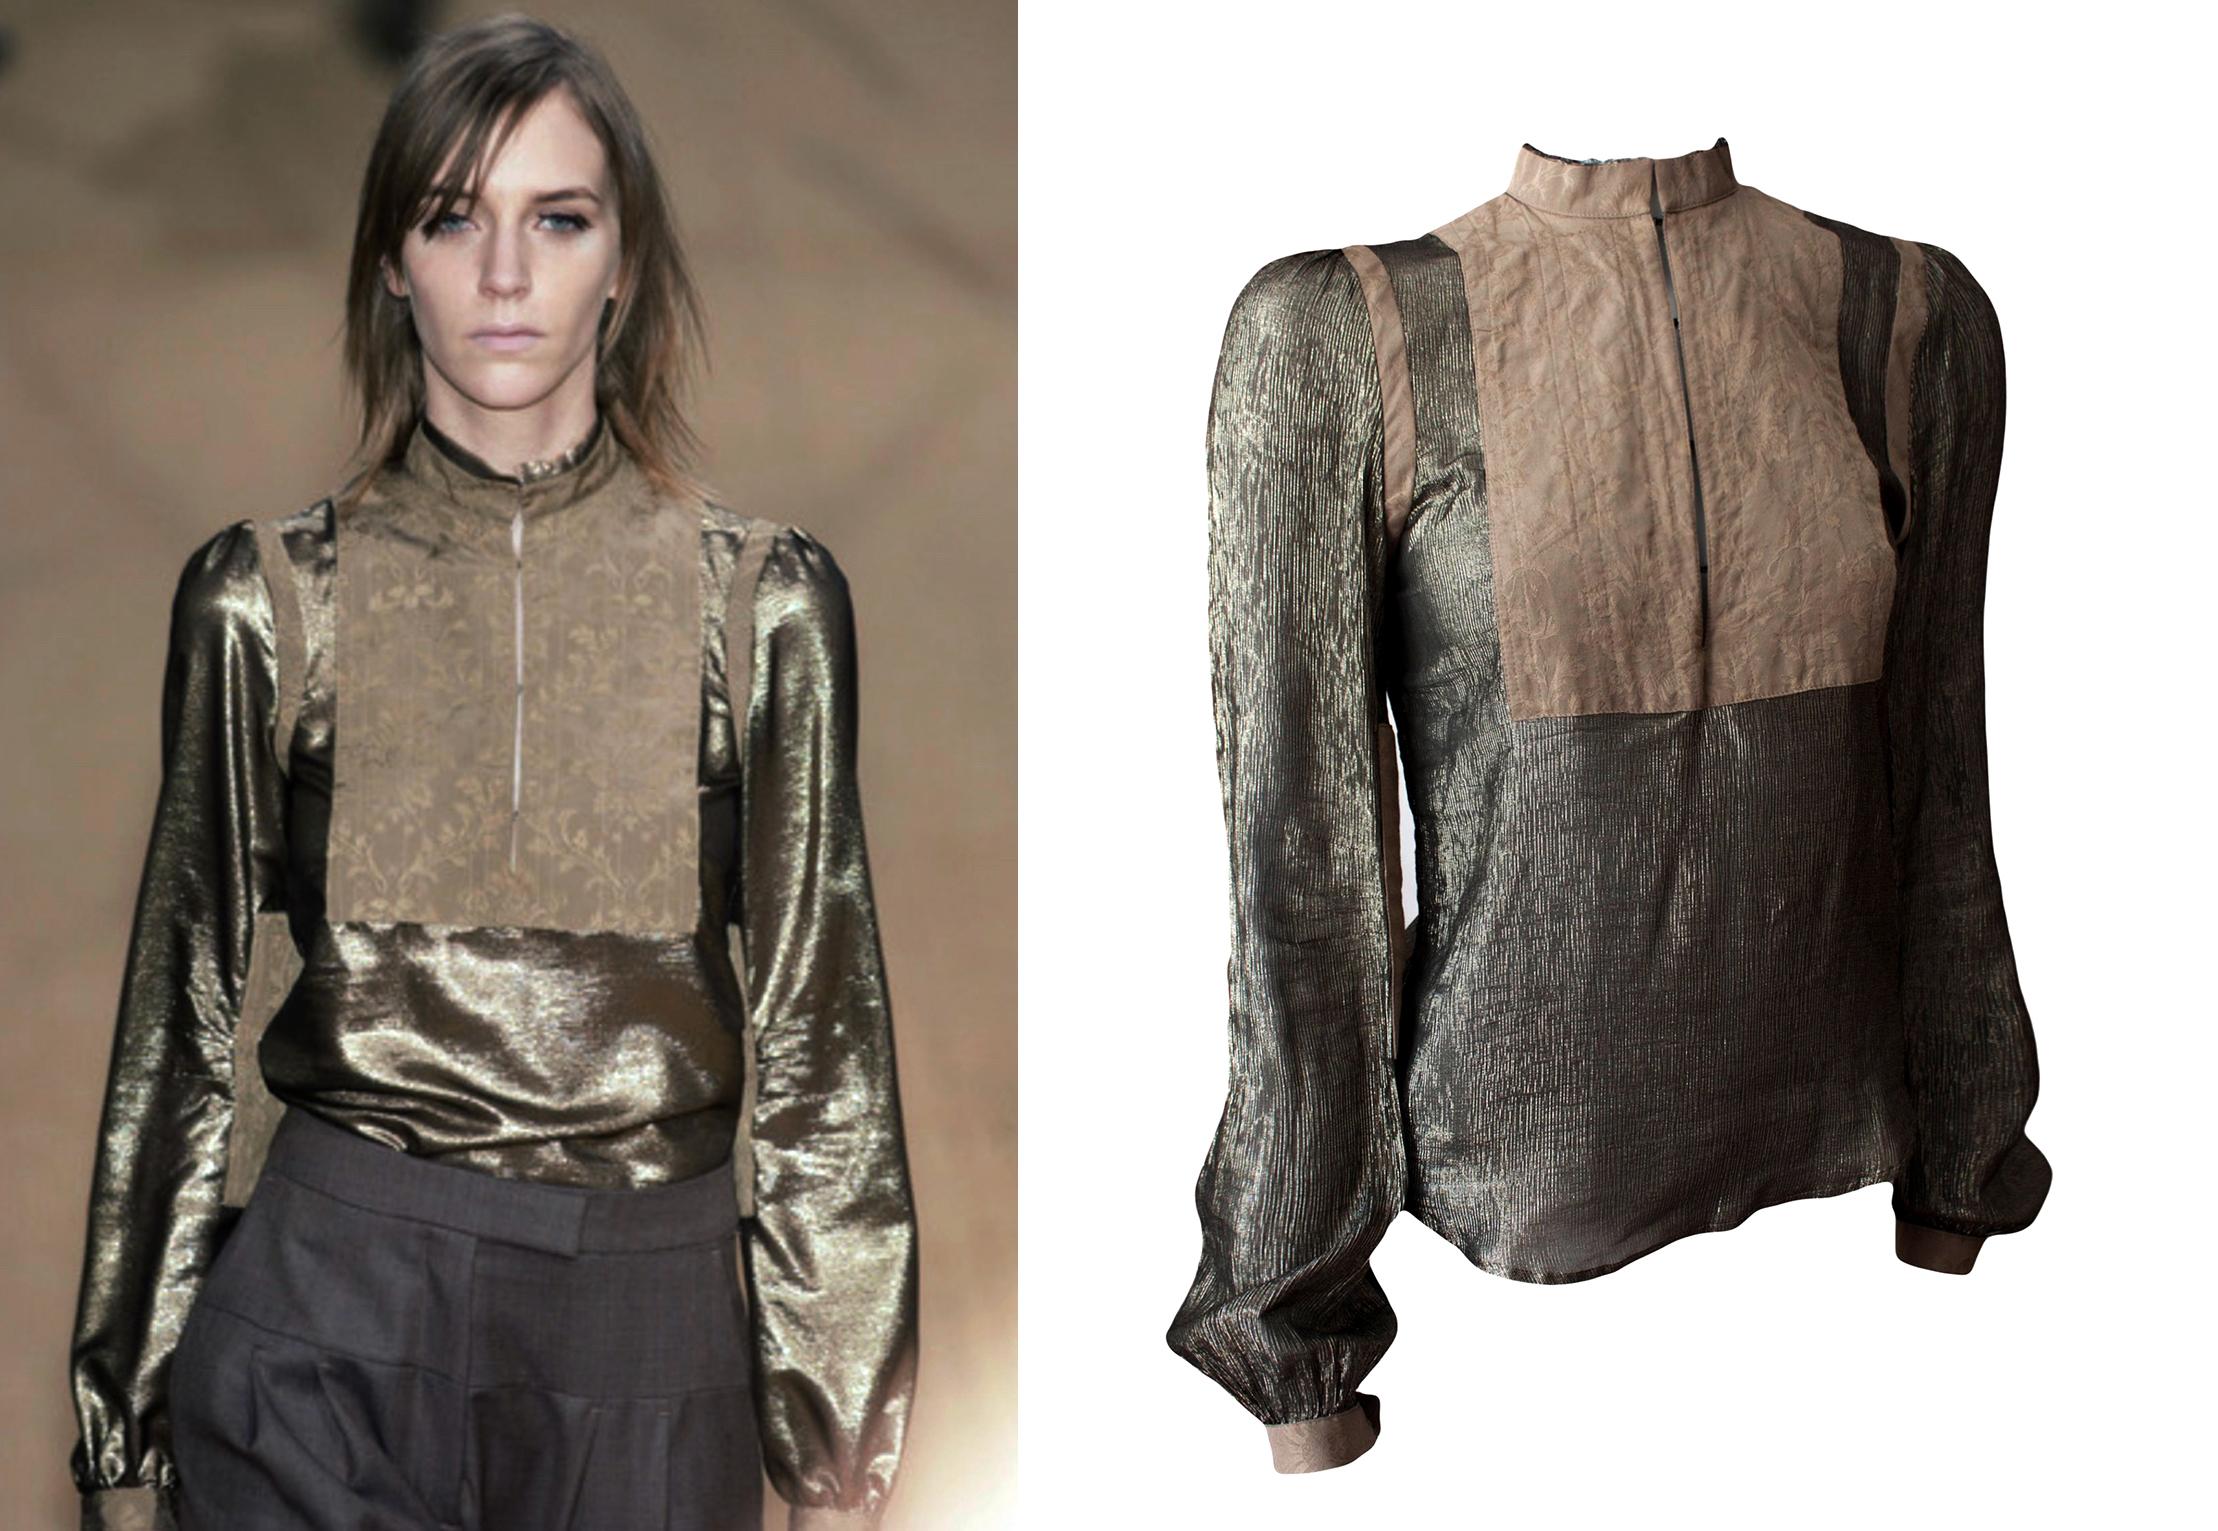 
FW 2002 Collection Runway Piece by Véronique Branquinho. Gold metallic lamé blouse, very beautiful and delicate high quality.
Marked size 38, best fit for S


